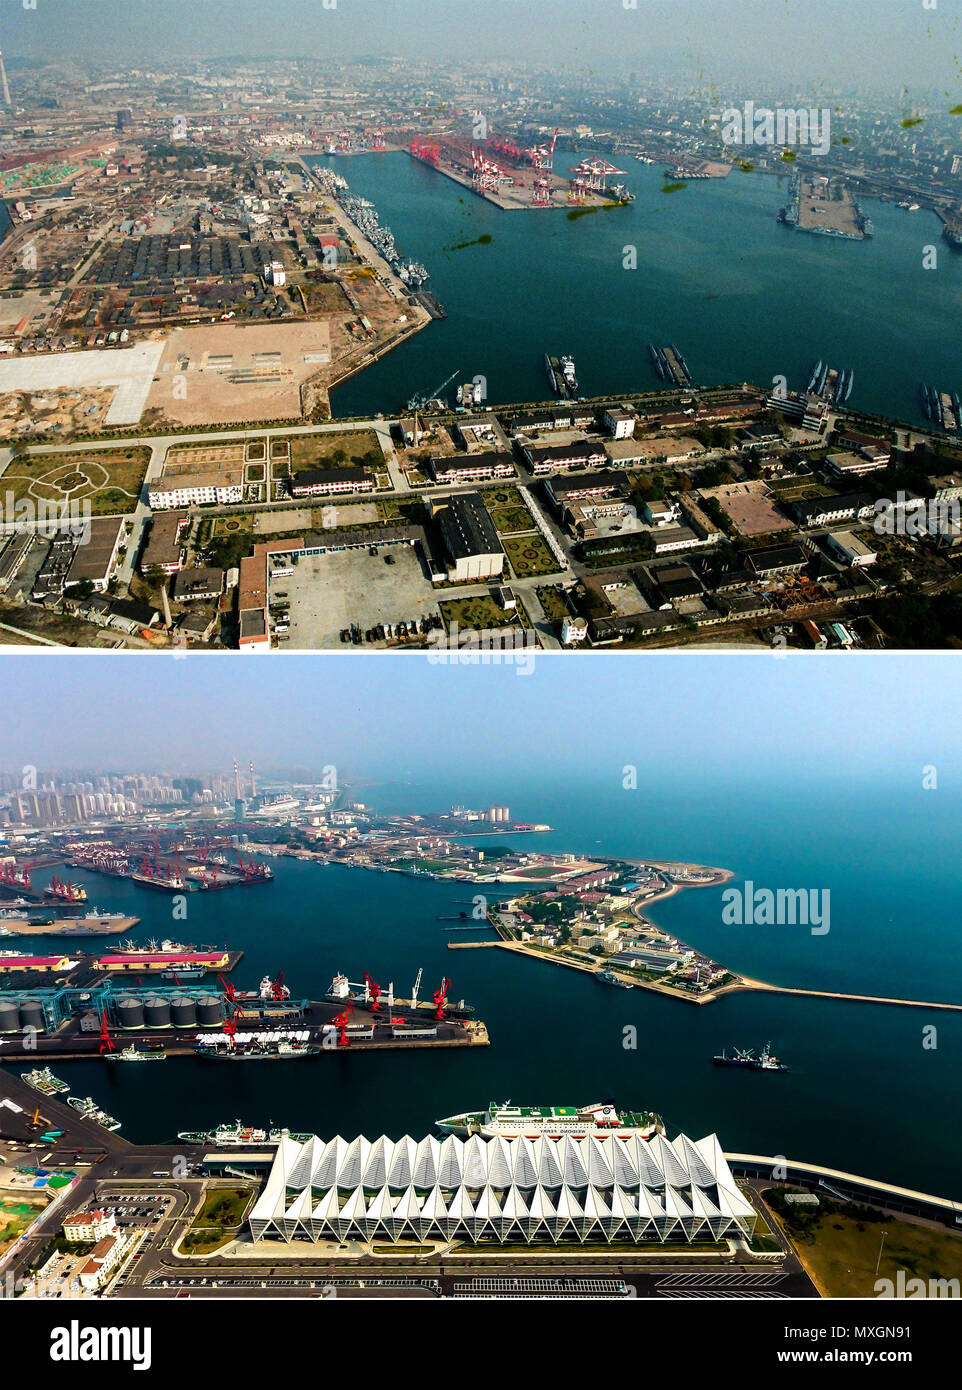 180604) -- QINGDAO, June 4, 2018 (Xinhua) -- Combined photos show aerial  views of Qingdao Port in Qingdao, east China's Shandong Province, taken  respectively in 1996 (upper) and on May 7, 2018.